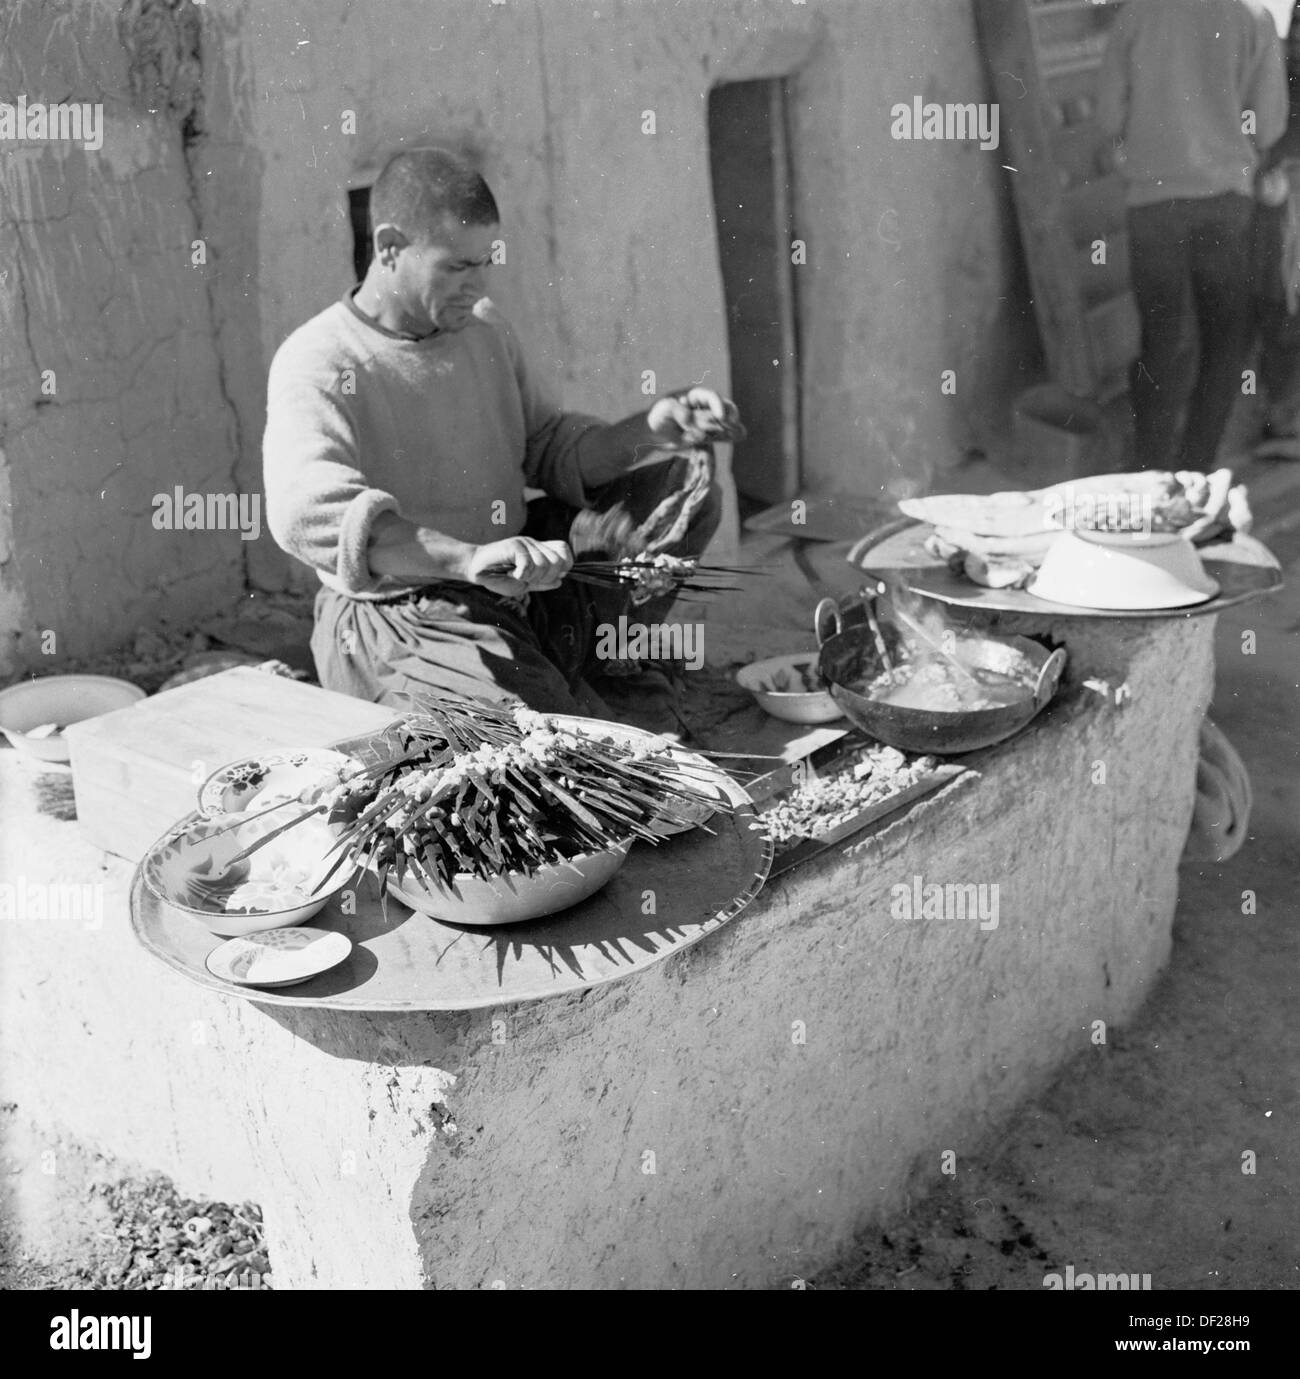 Historical picture from Afghanistan, 1950s by J Allan Cash of local trader at his stove, an afghan kitchen, preparing his food. Stock Photo